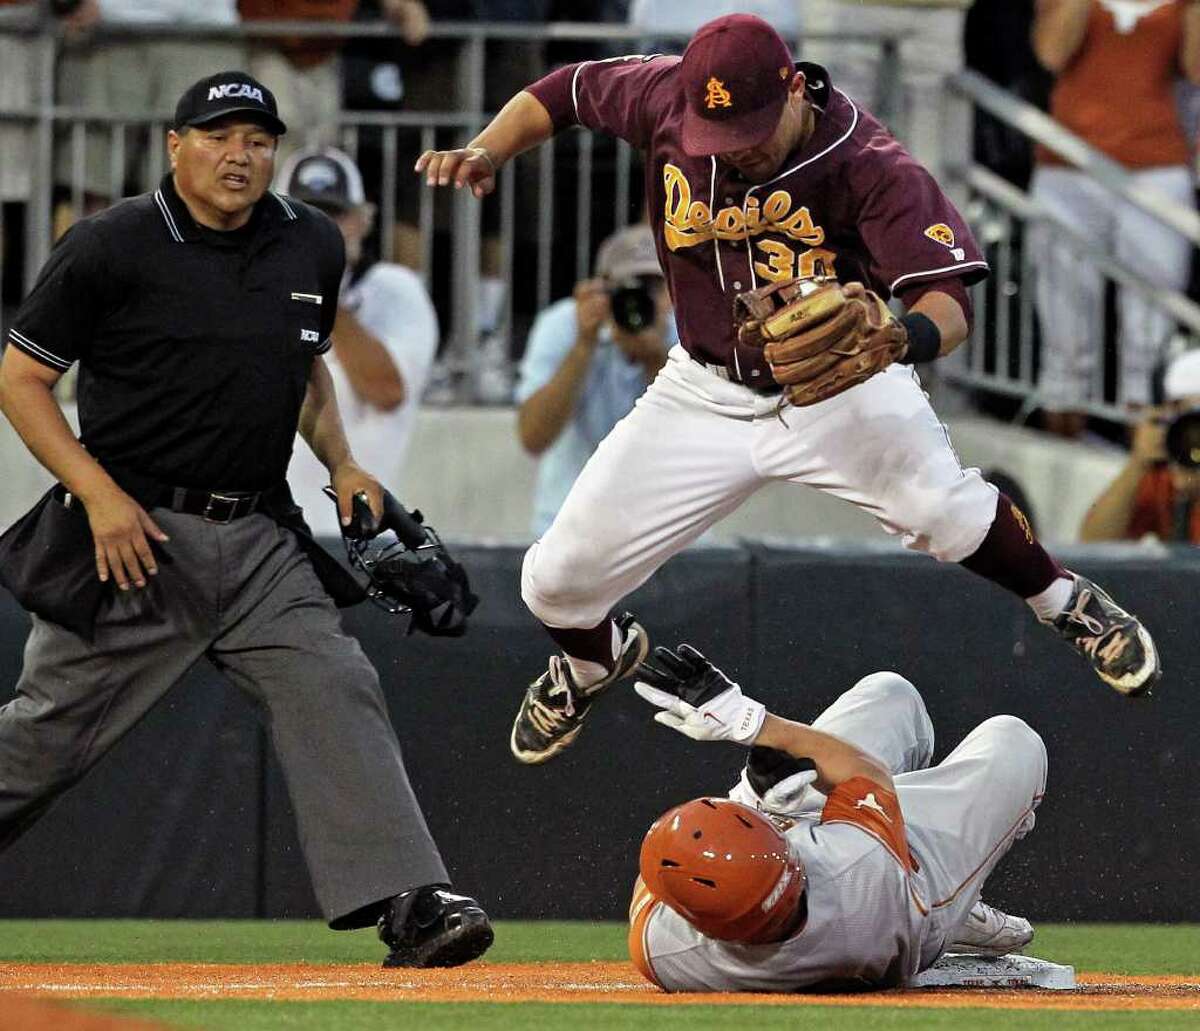 Arizona State third baseman Riccio Torrez leaps over the slide of Tant Sheperd who is safe for a triple in the last inning as the Texas Longhorns play Arizona State in game 2 of their super regional playoff series at Disch-Falk Field in Austin on June 11, 2011. Tom Reel/Staff